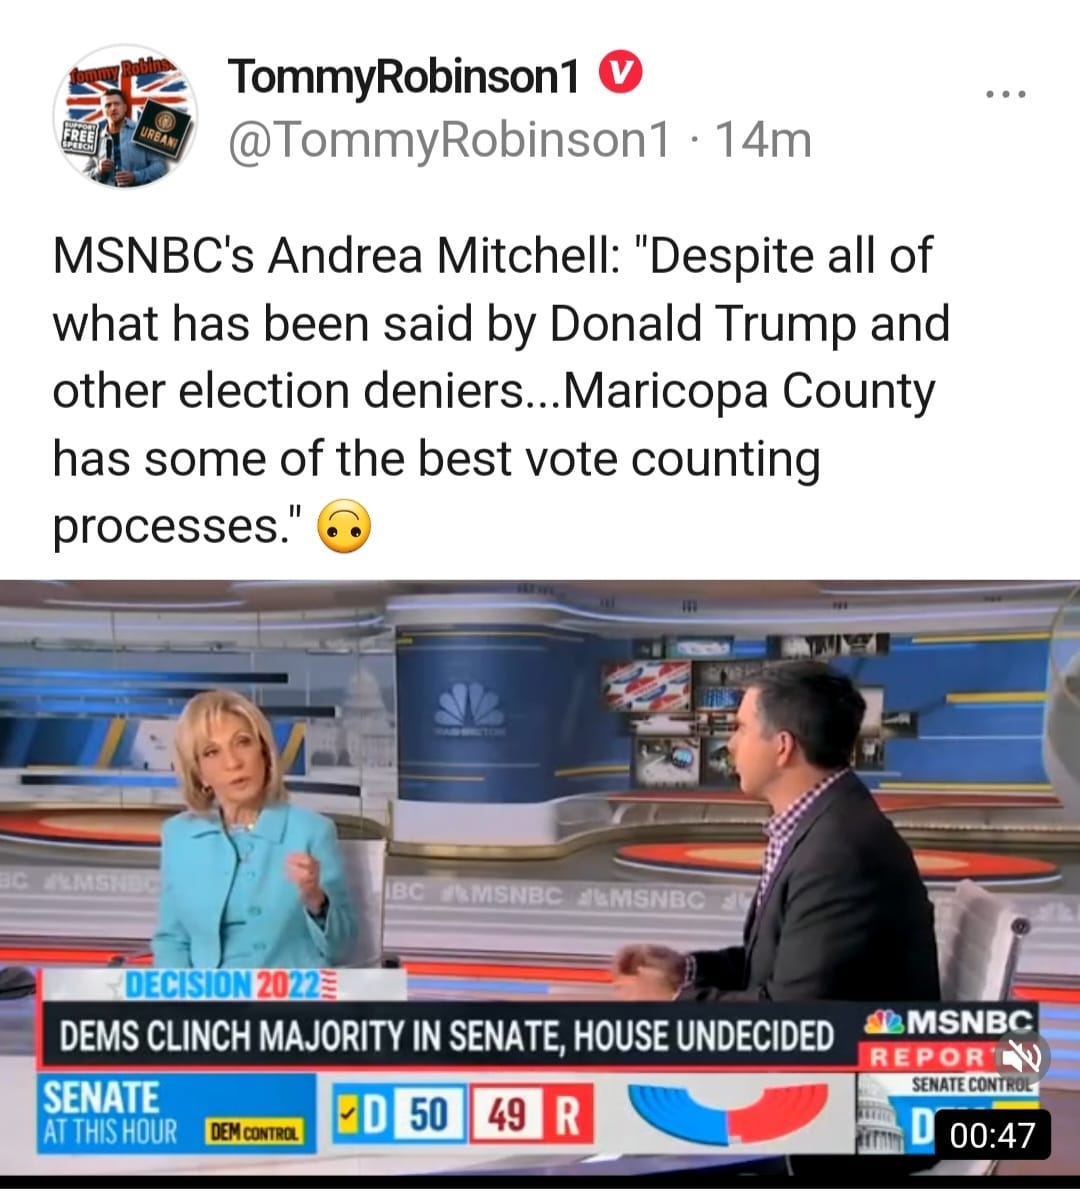 May be an image of 2 people and text that says 'REE TommyRobinson1 @TommyRobinson1 14m MSNBC's Andrea Mitchell: "Despite all of what has been said by Donald Trump and other election deniers...Maricopa County has some of the best vote counting processes." BC /MSNBC #LMSNBC DECISION 20 2022 DEMS CLINCH MAJORITY IN SENATE, HOUSE UNDECIDED SENATE AT THIS HOUR DEMCONTROL 50 49 R MSNBC REPOR SENATE CONT 00:47'